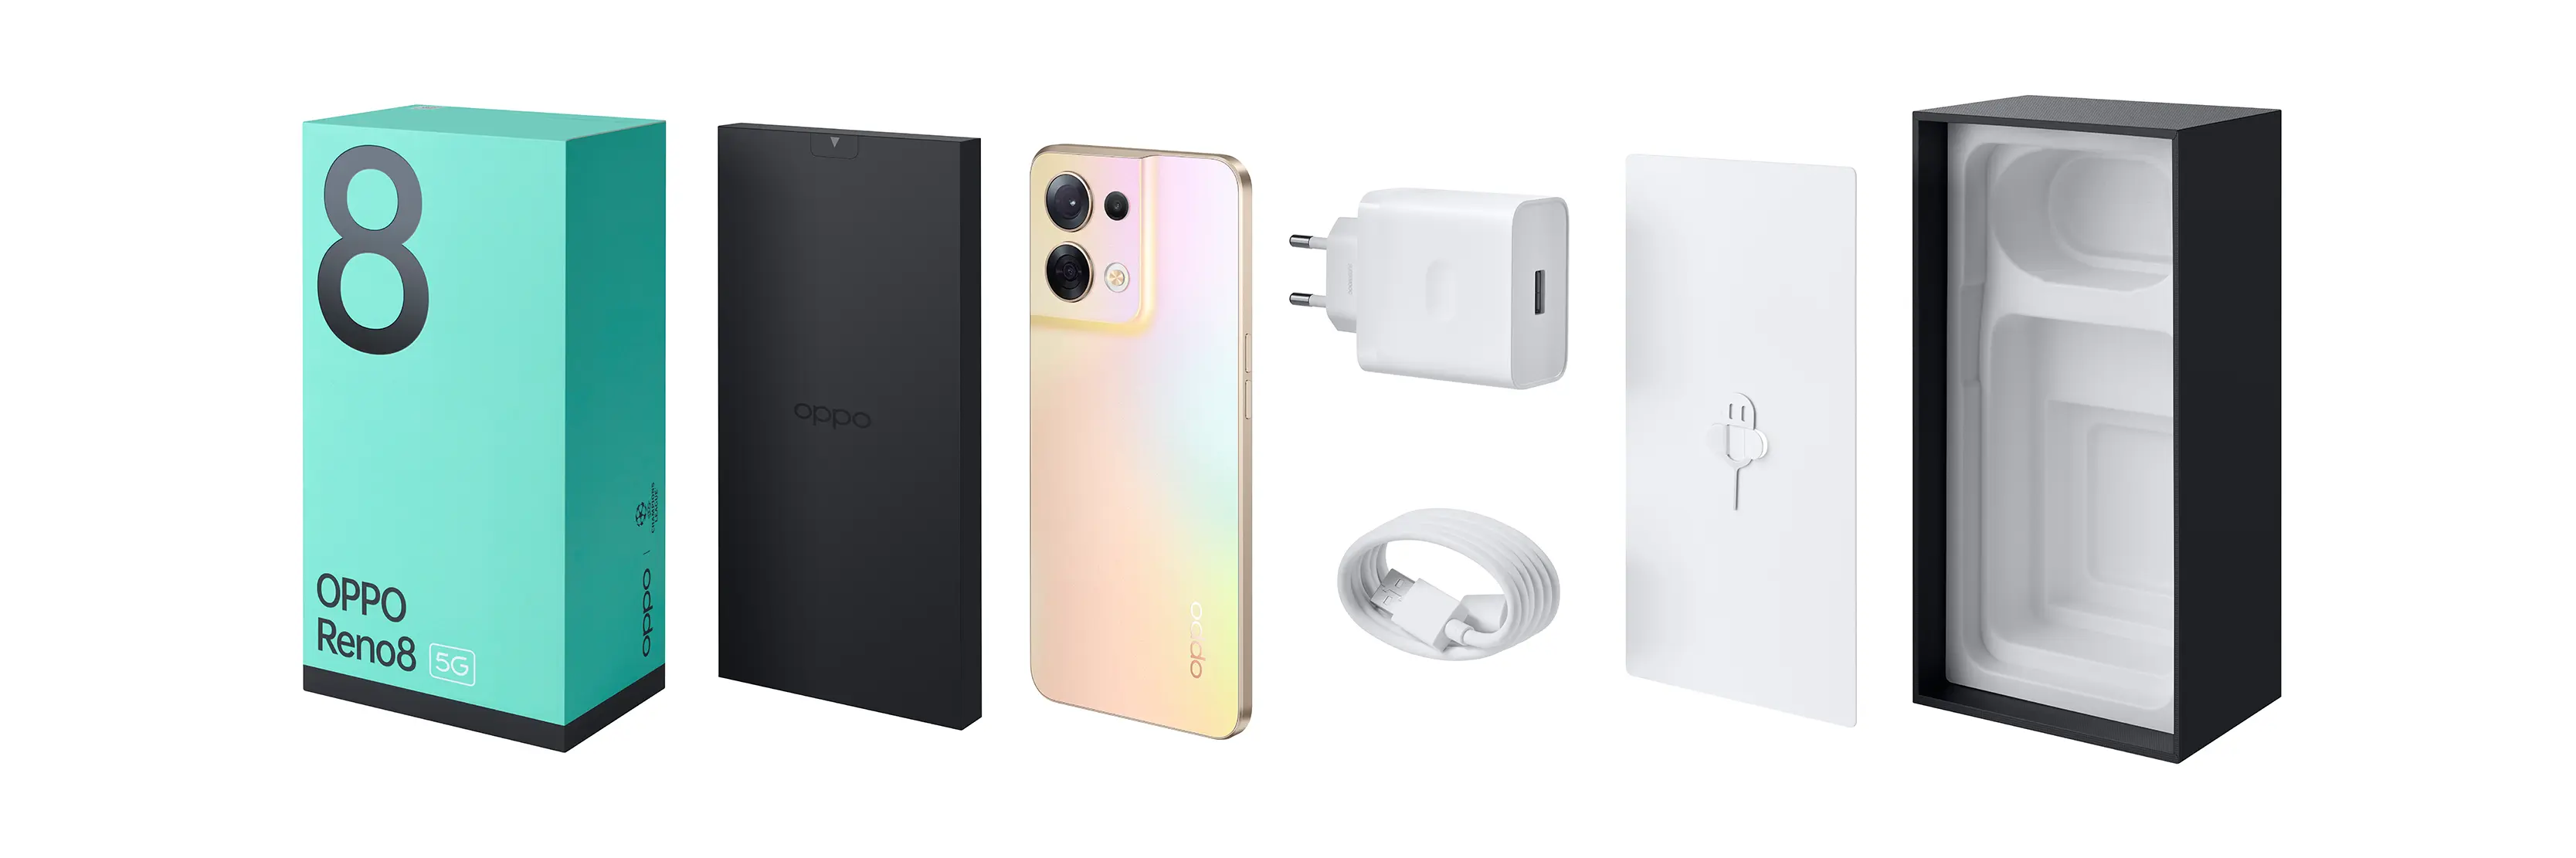 OPPO-Store-UnboxingReno8-Gold.png